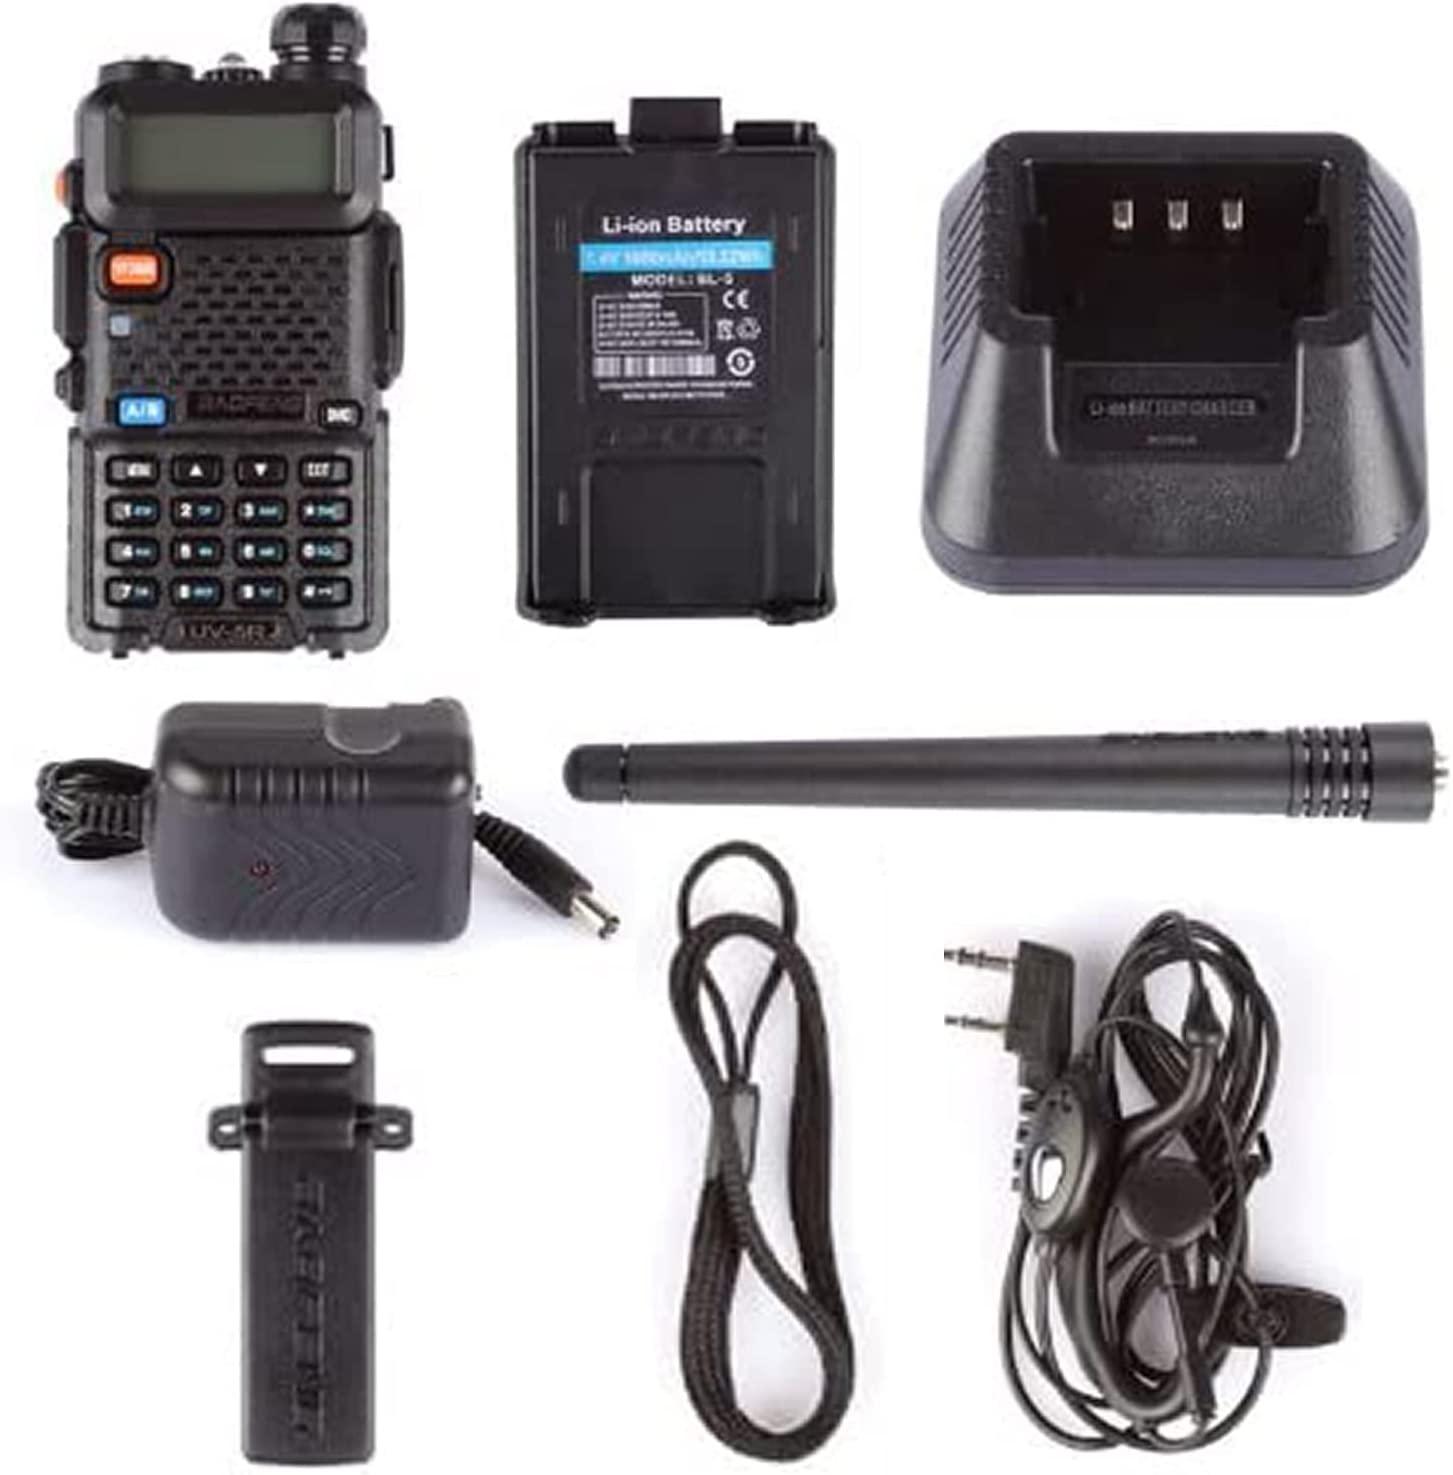  BAOFENG UV-5R Dual Band Two Way Radio (Black), 144-148MHz &  420-450MHz : Everything Else